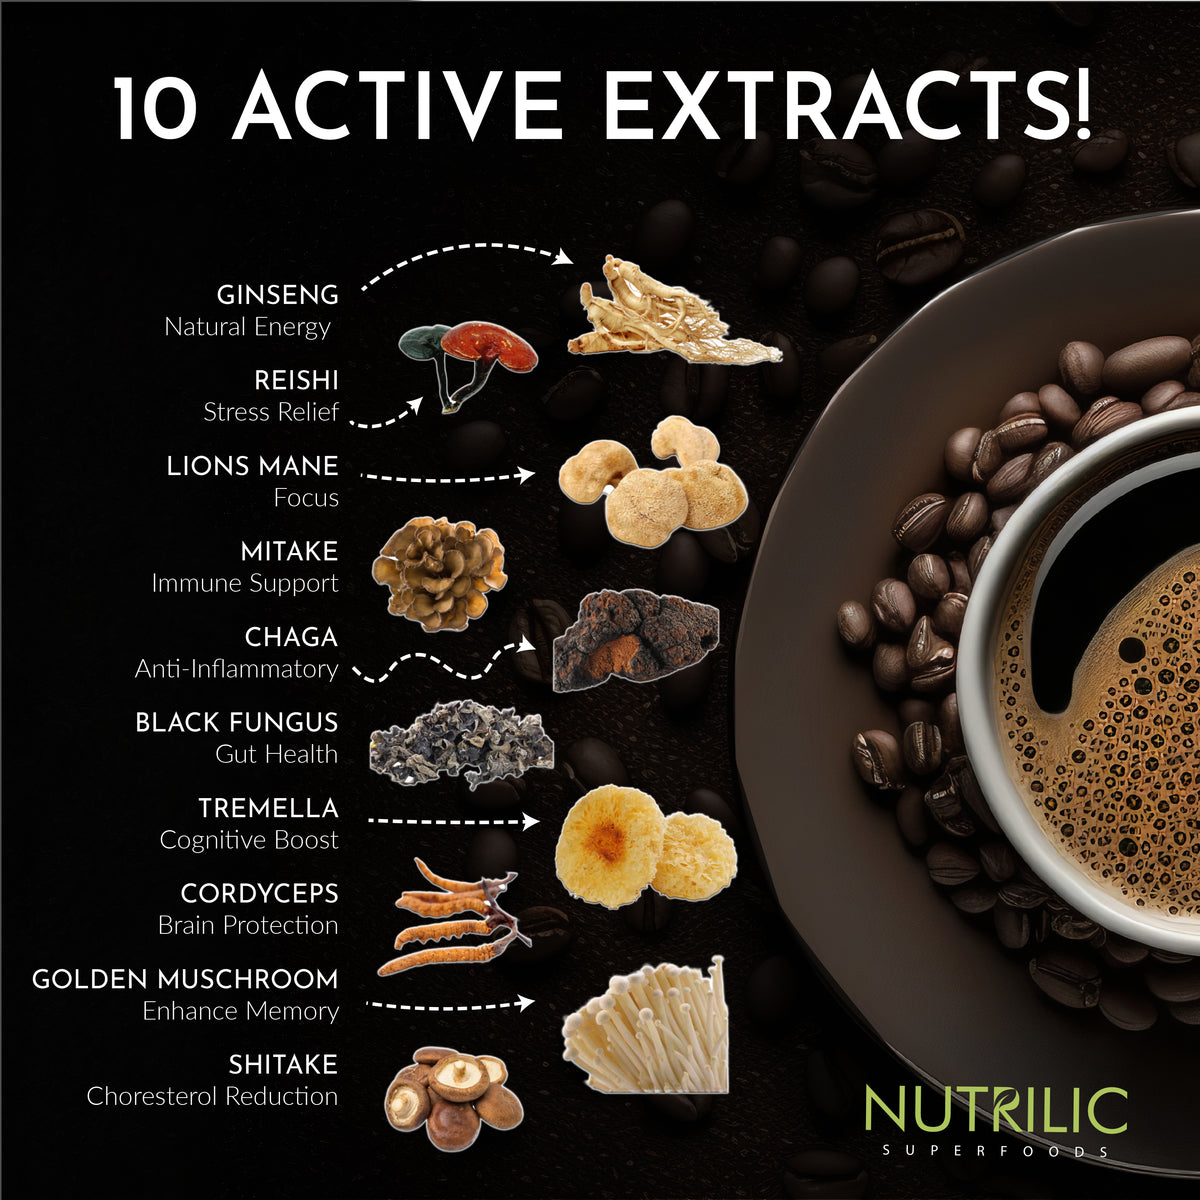 Discover the extraordinary difference in our coffee – it's infused with not one, not two, but a remarkable 10 active extracts. We've harnessed the power of nature to bring you a coffee experience like no other. Explore the rich blend of flavors and the potential benefits of these 10 carefully selected extracts with each invigorating cup